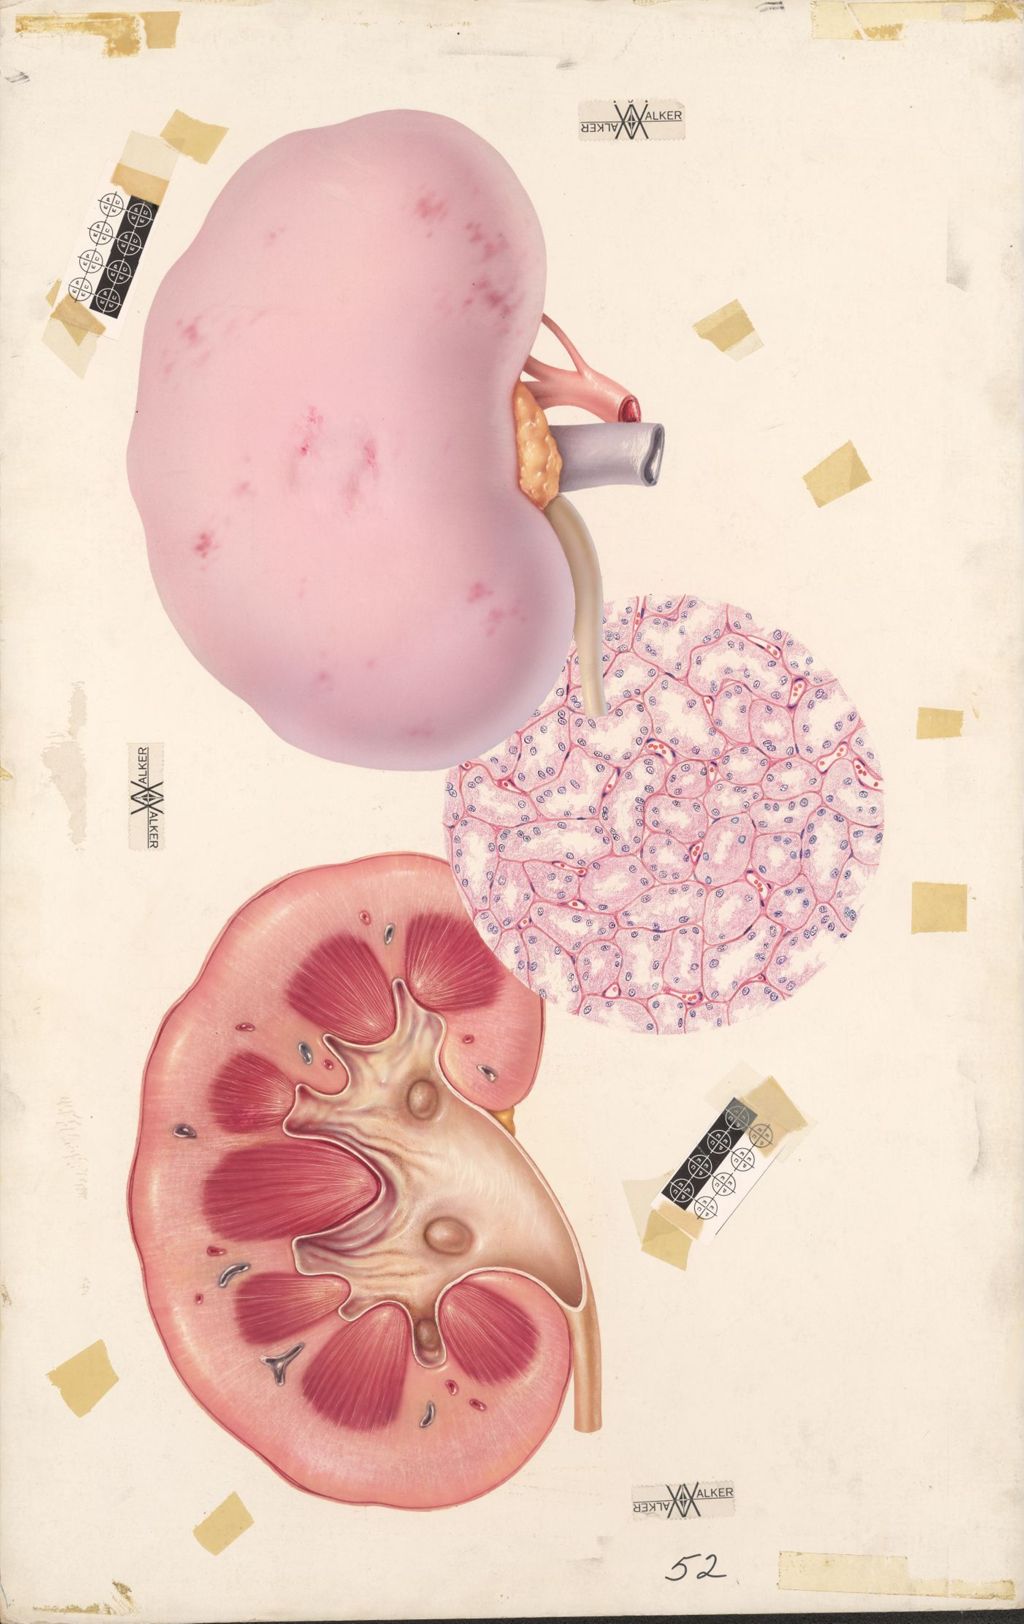 Miniature of Diuril and Hydrodiuril, Acute Nephrosis, The external view depicts the pale, swollen kidney